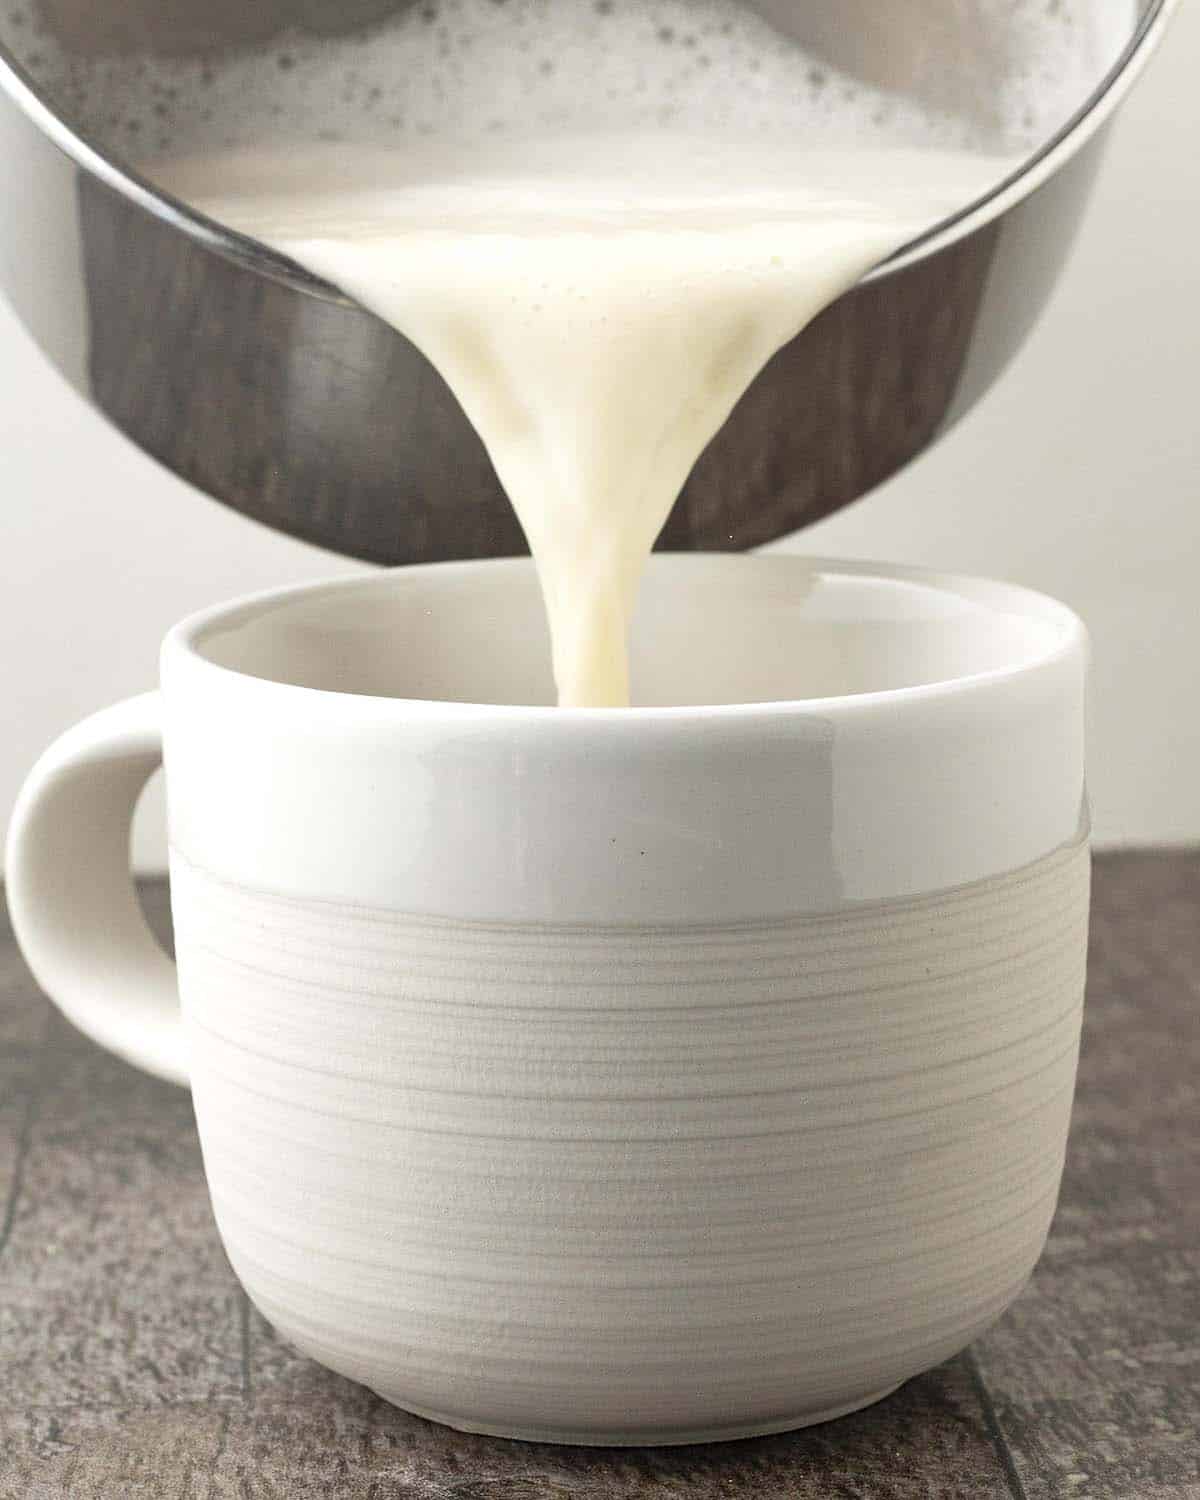 Almond milk being poured from a pot into a mug.